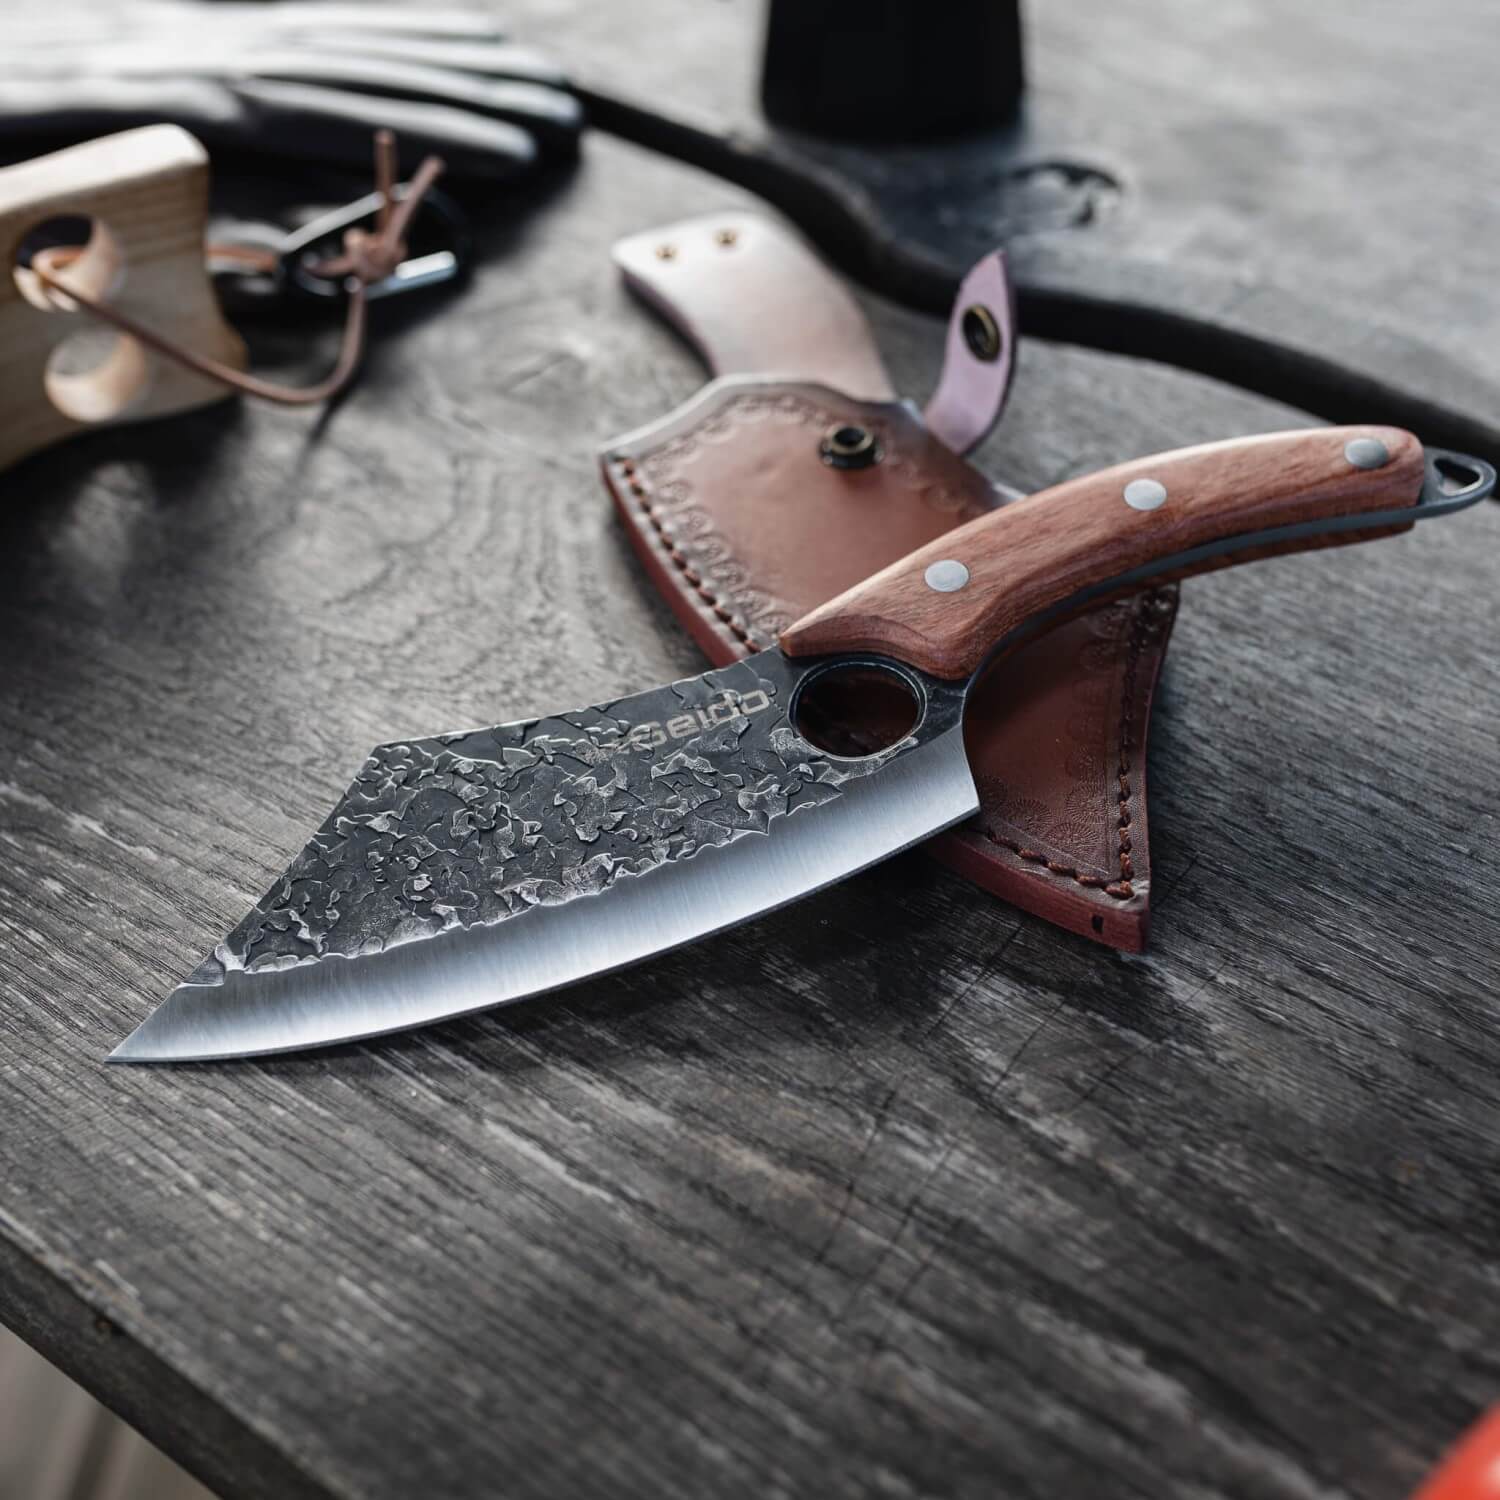 Behold the Hakai Cleaver Knife, a masterpiece from Seido Knives, resting on a table with its protective leather sheath.